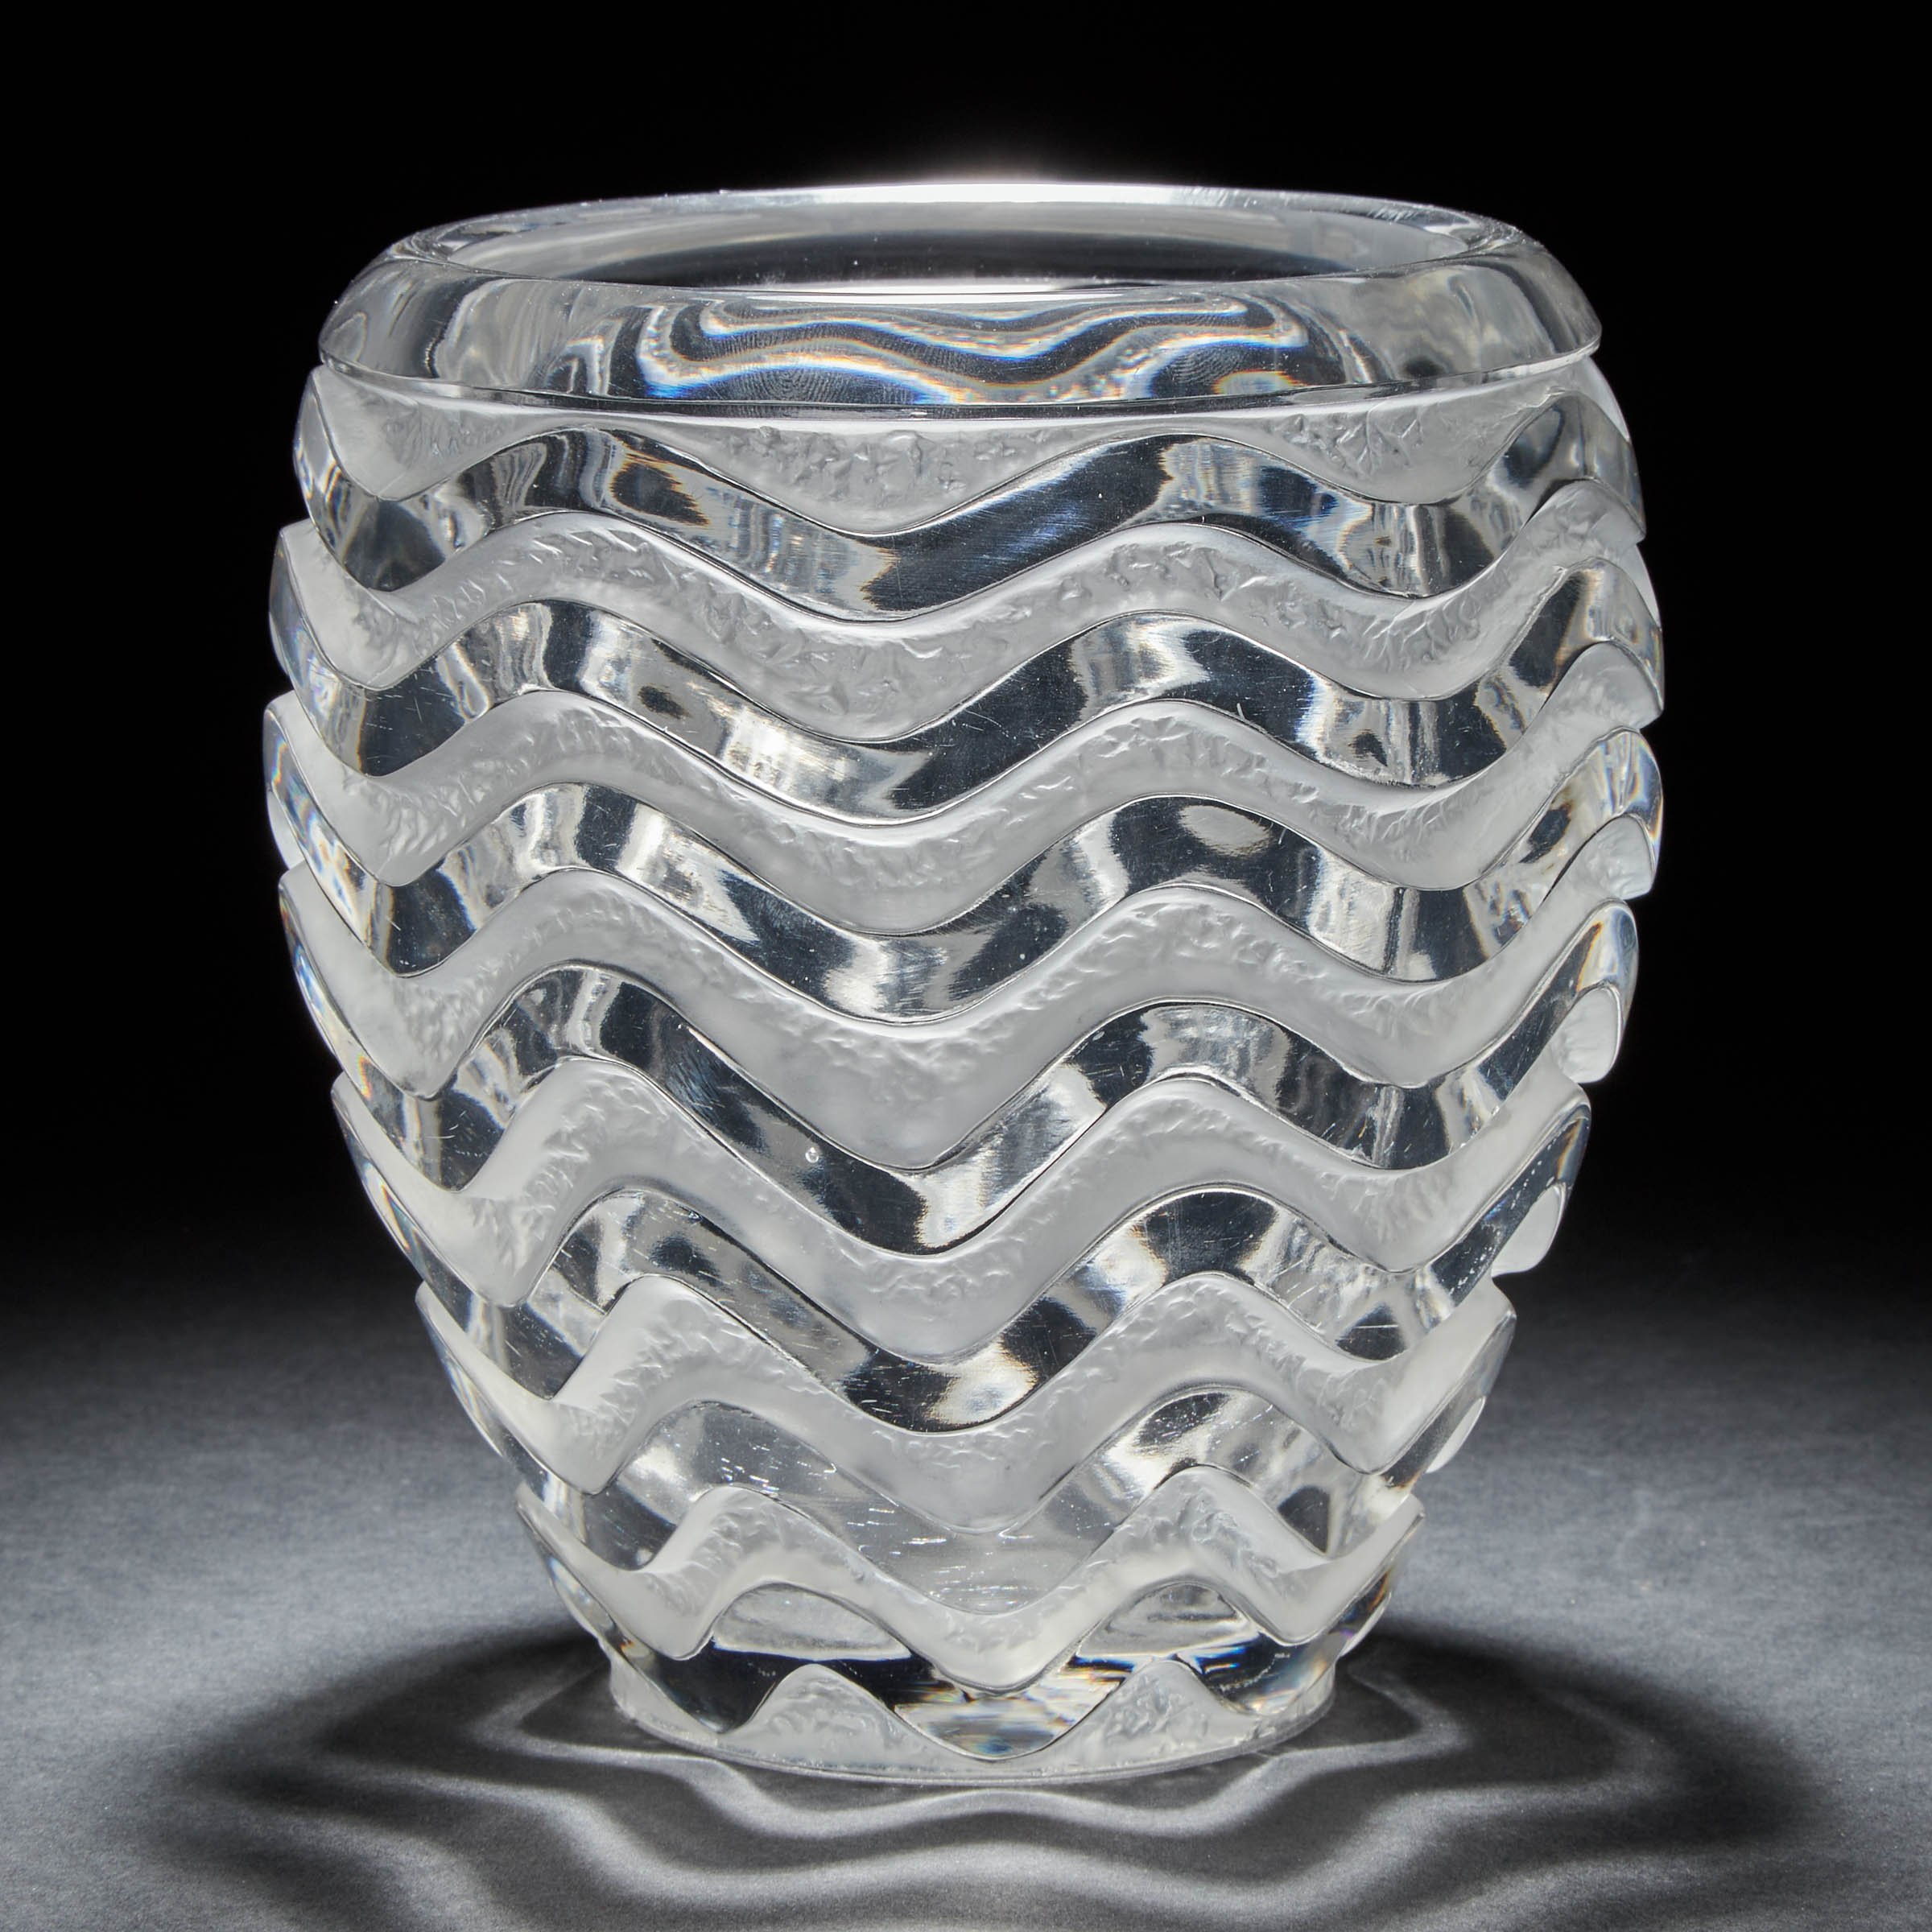 'Méandres', Lalique Moulded and Partly Frosted Glass Vase, post-1945